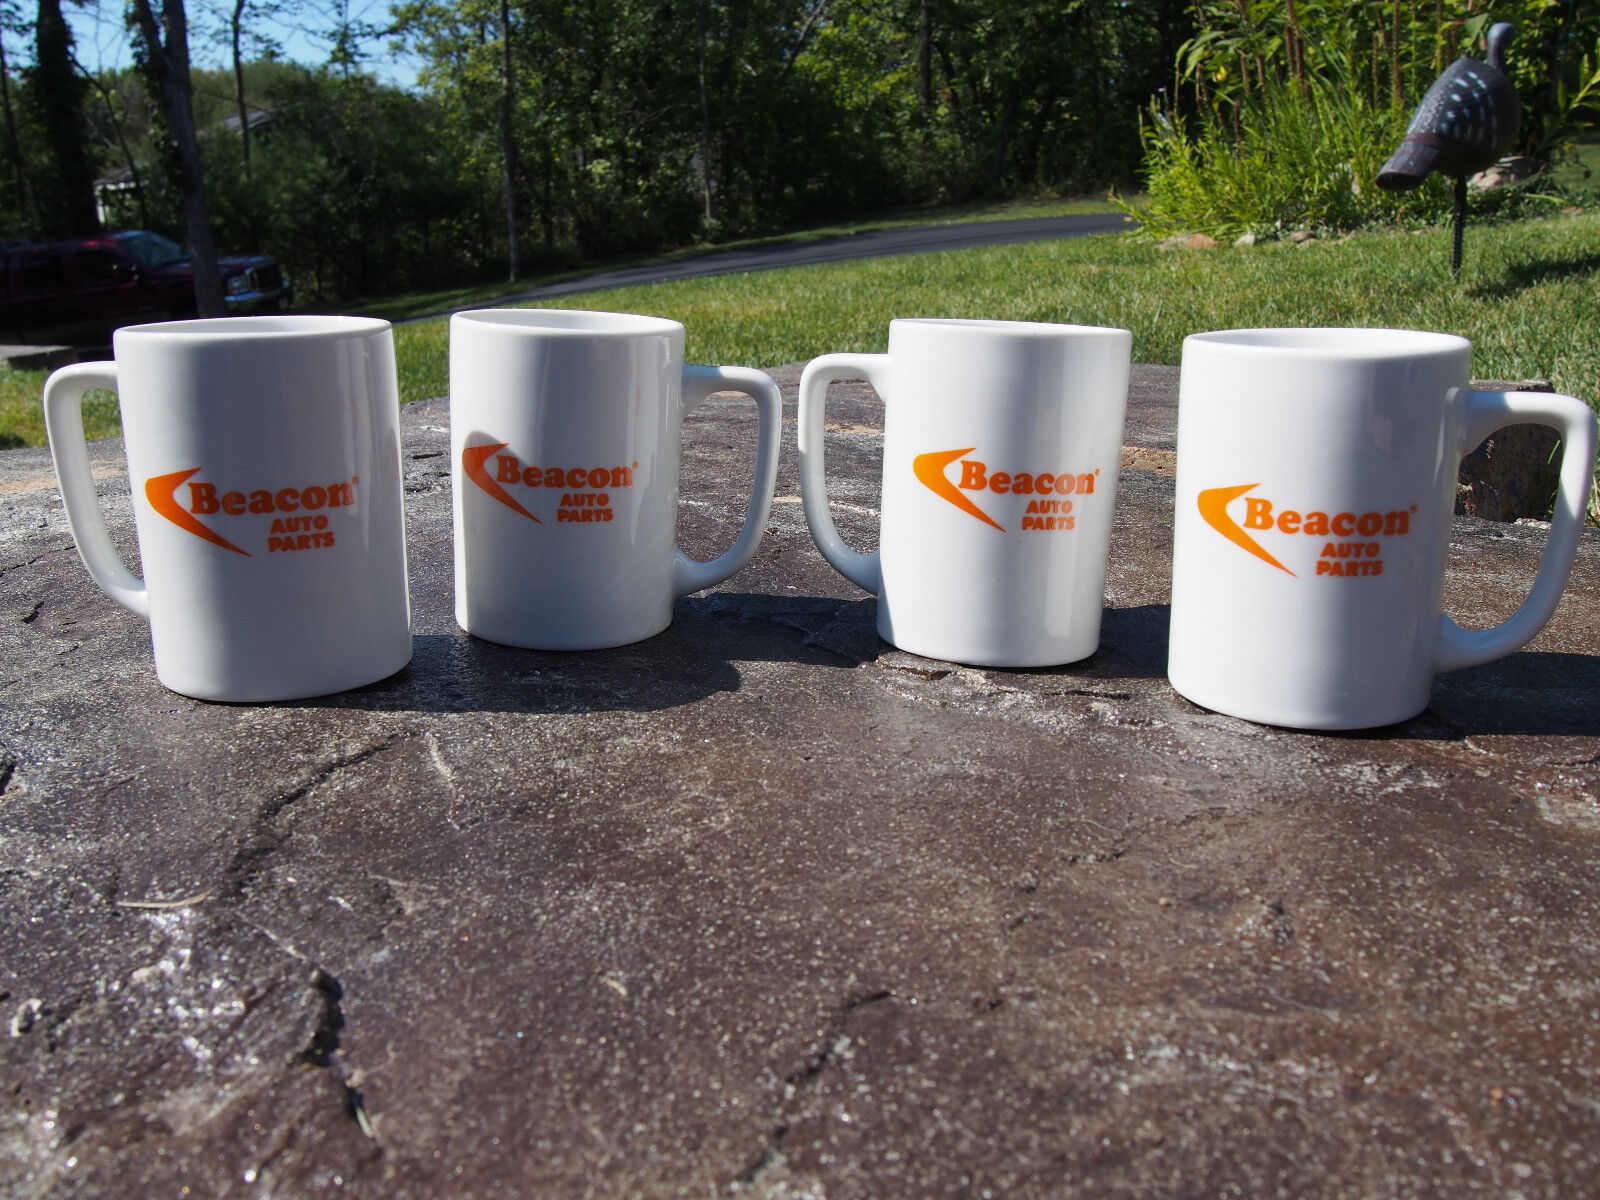 Vintage Beacon Auto Parts Coffee Mugs Cups Advertising Set of 4 New Old Stock